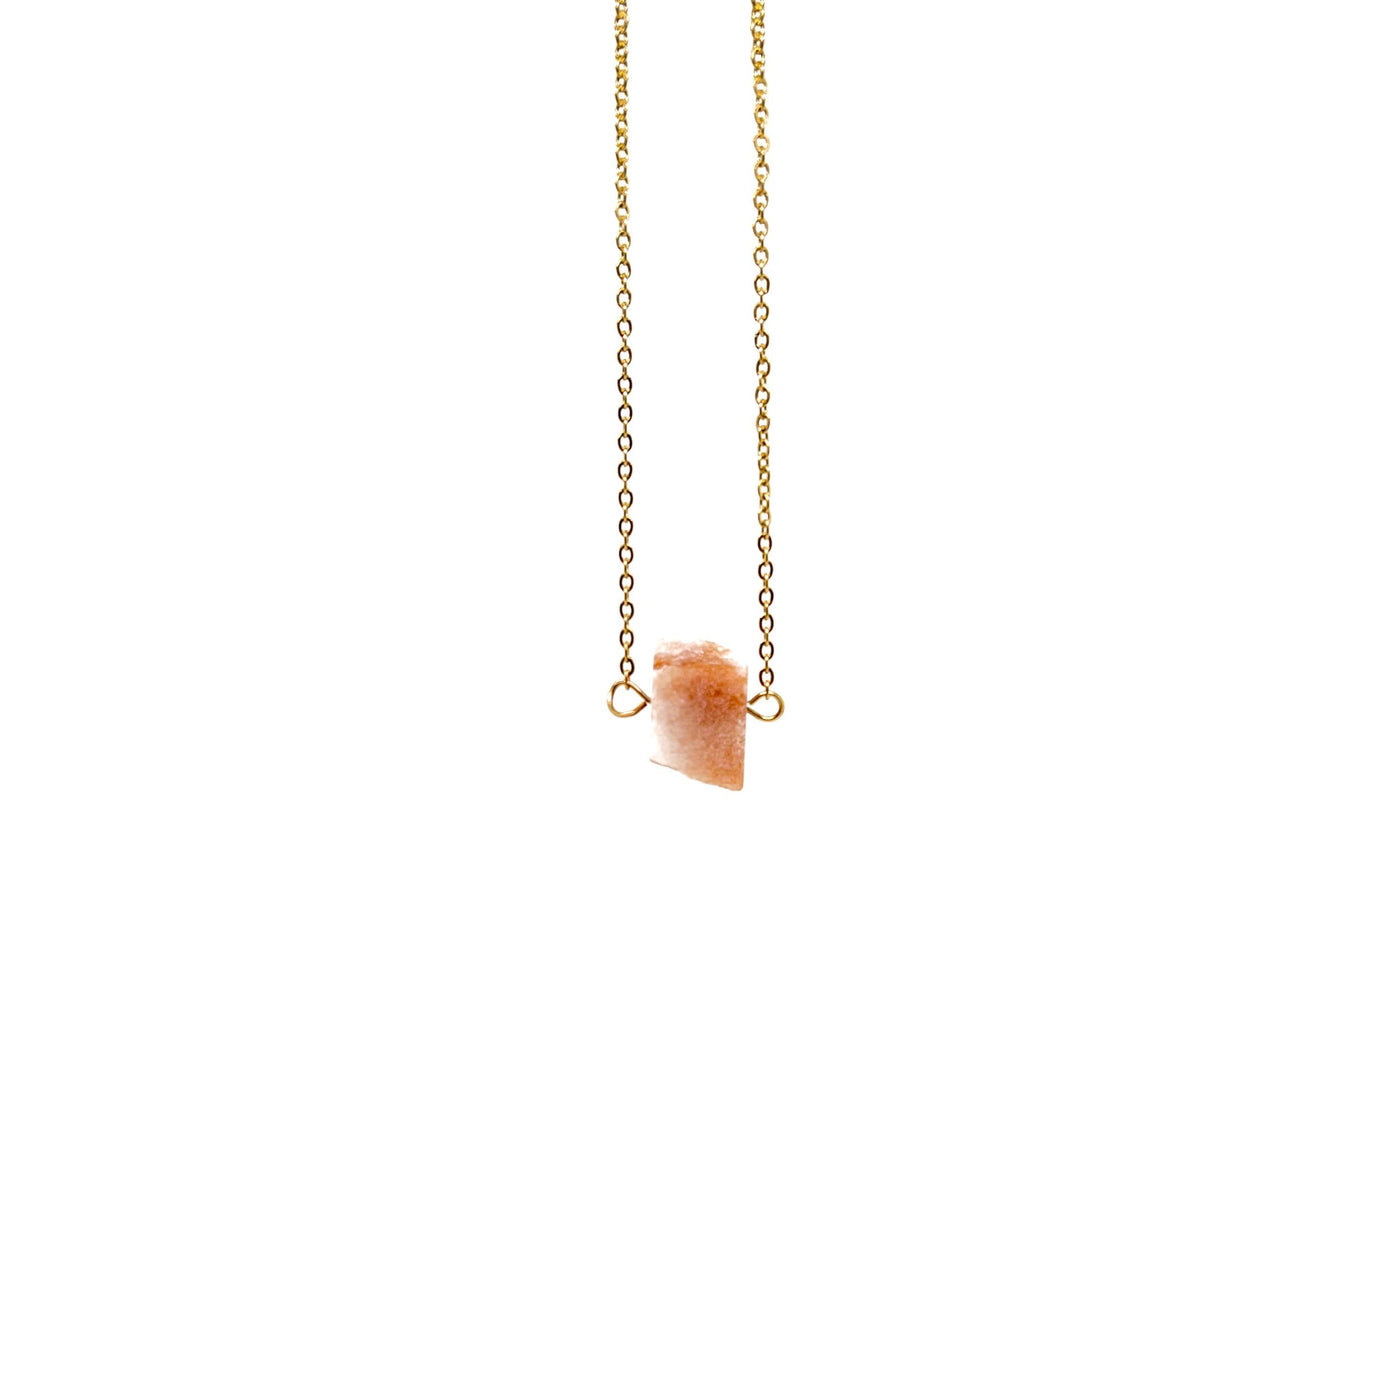 The Natural Sunstone Necklace